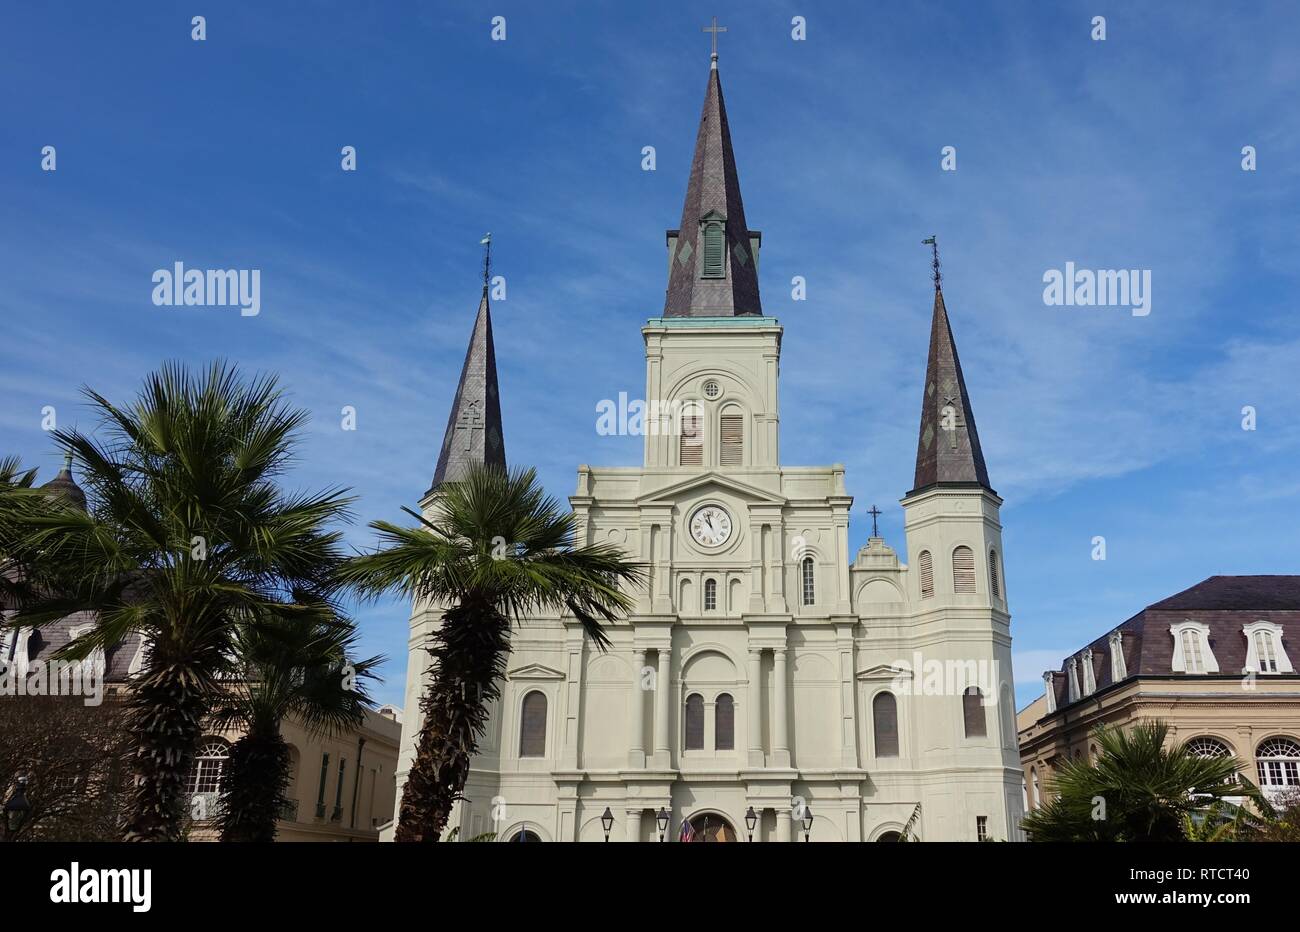 New Orleans - French Quarter: St. Louis Cathedral - King L…